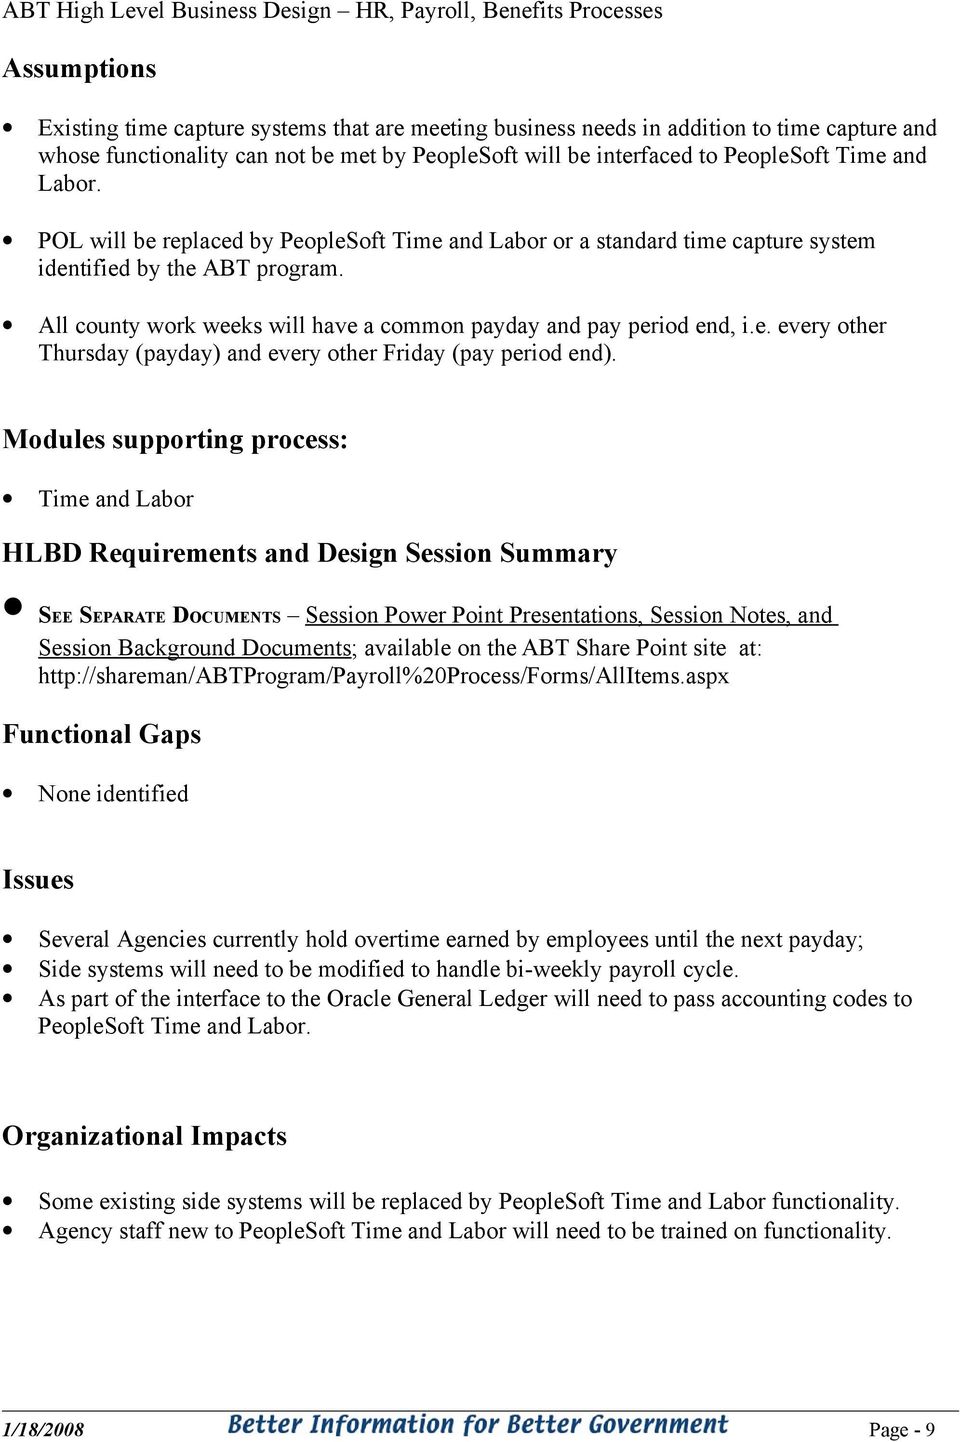 Modules supporting process: Time and Labor HLBD Requirements and Design Session Summary SEE SEPARATE DOCUMENTS Session Power Point Presentations, Session Notes, and Session Background Documents;